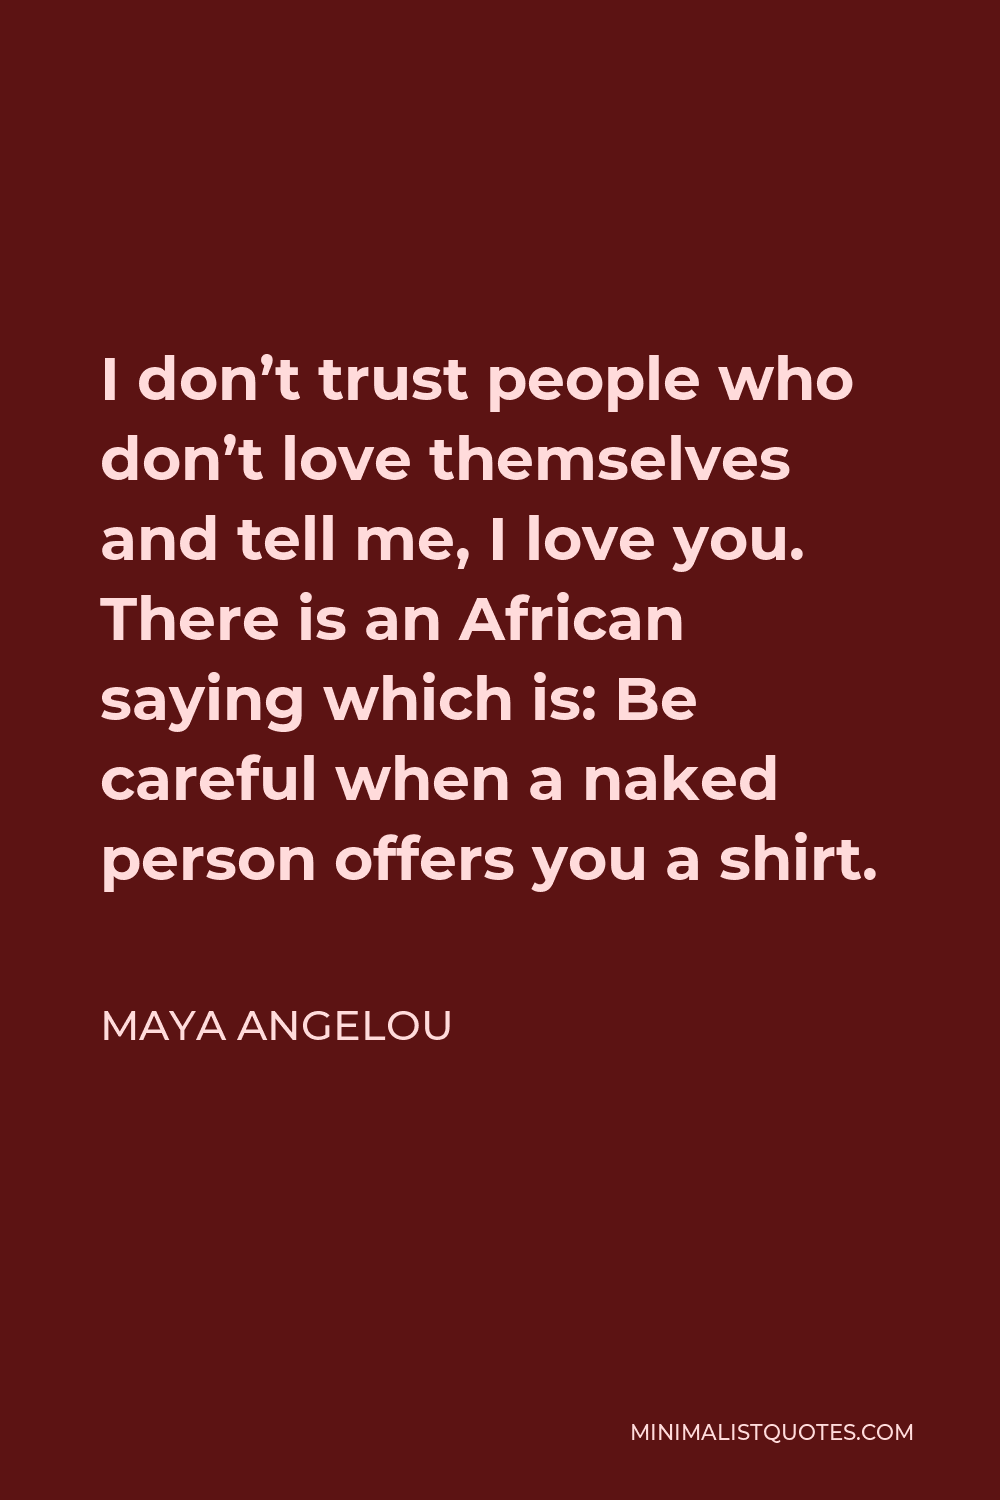 Maya Angelou Quote - I don’t trust people who don’t love themselves and tell me, I love you. There is an African saying which is: Be careful when a naked person offers you a shirt.